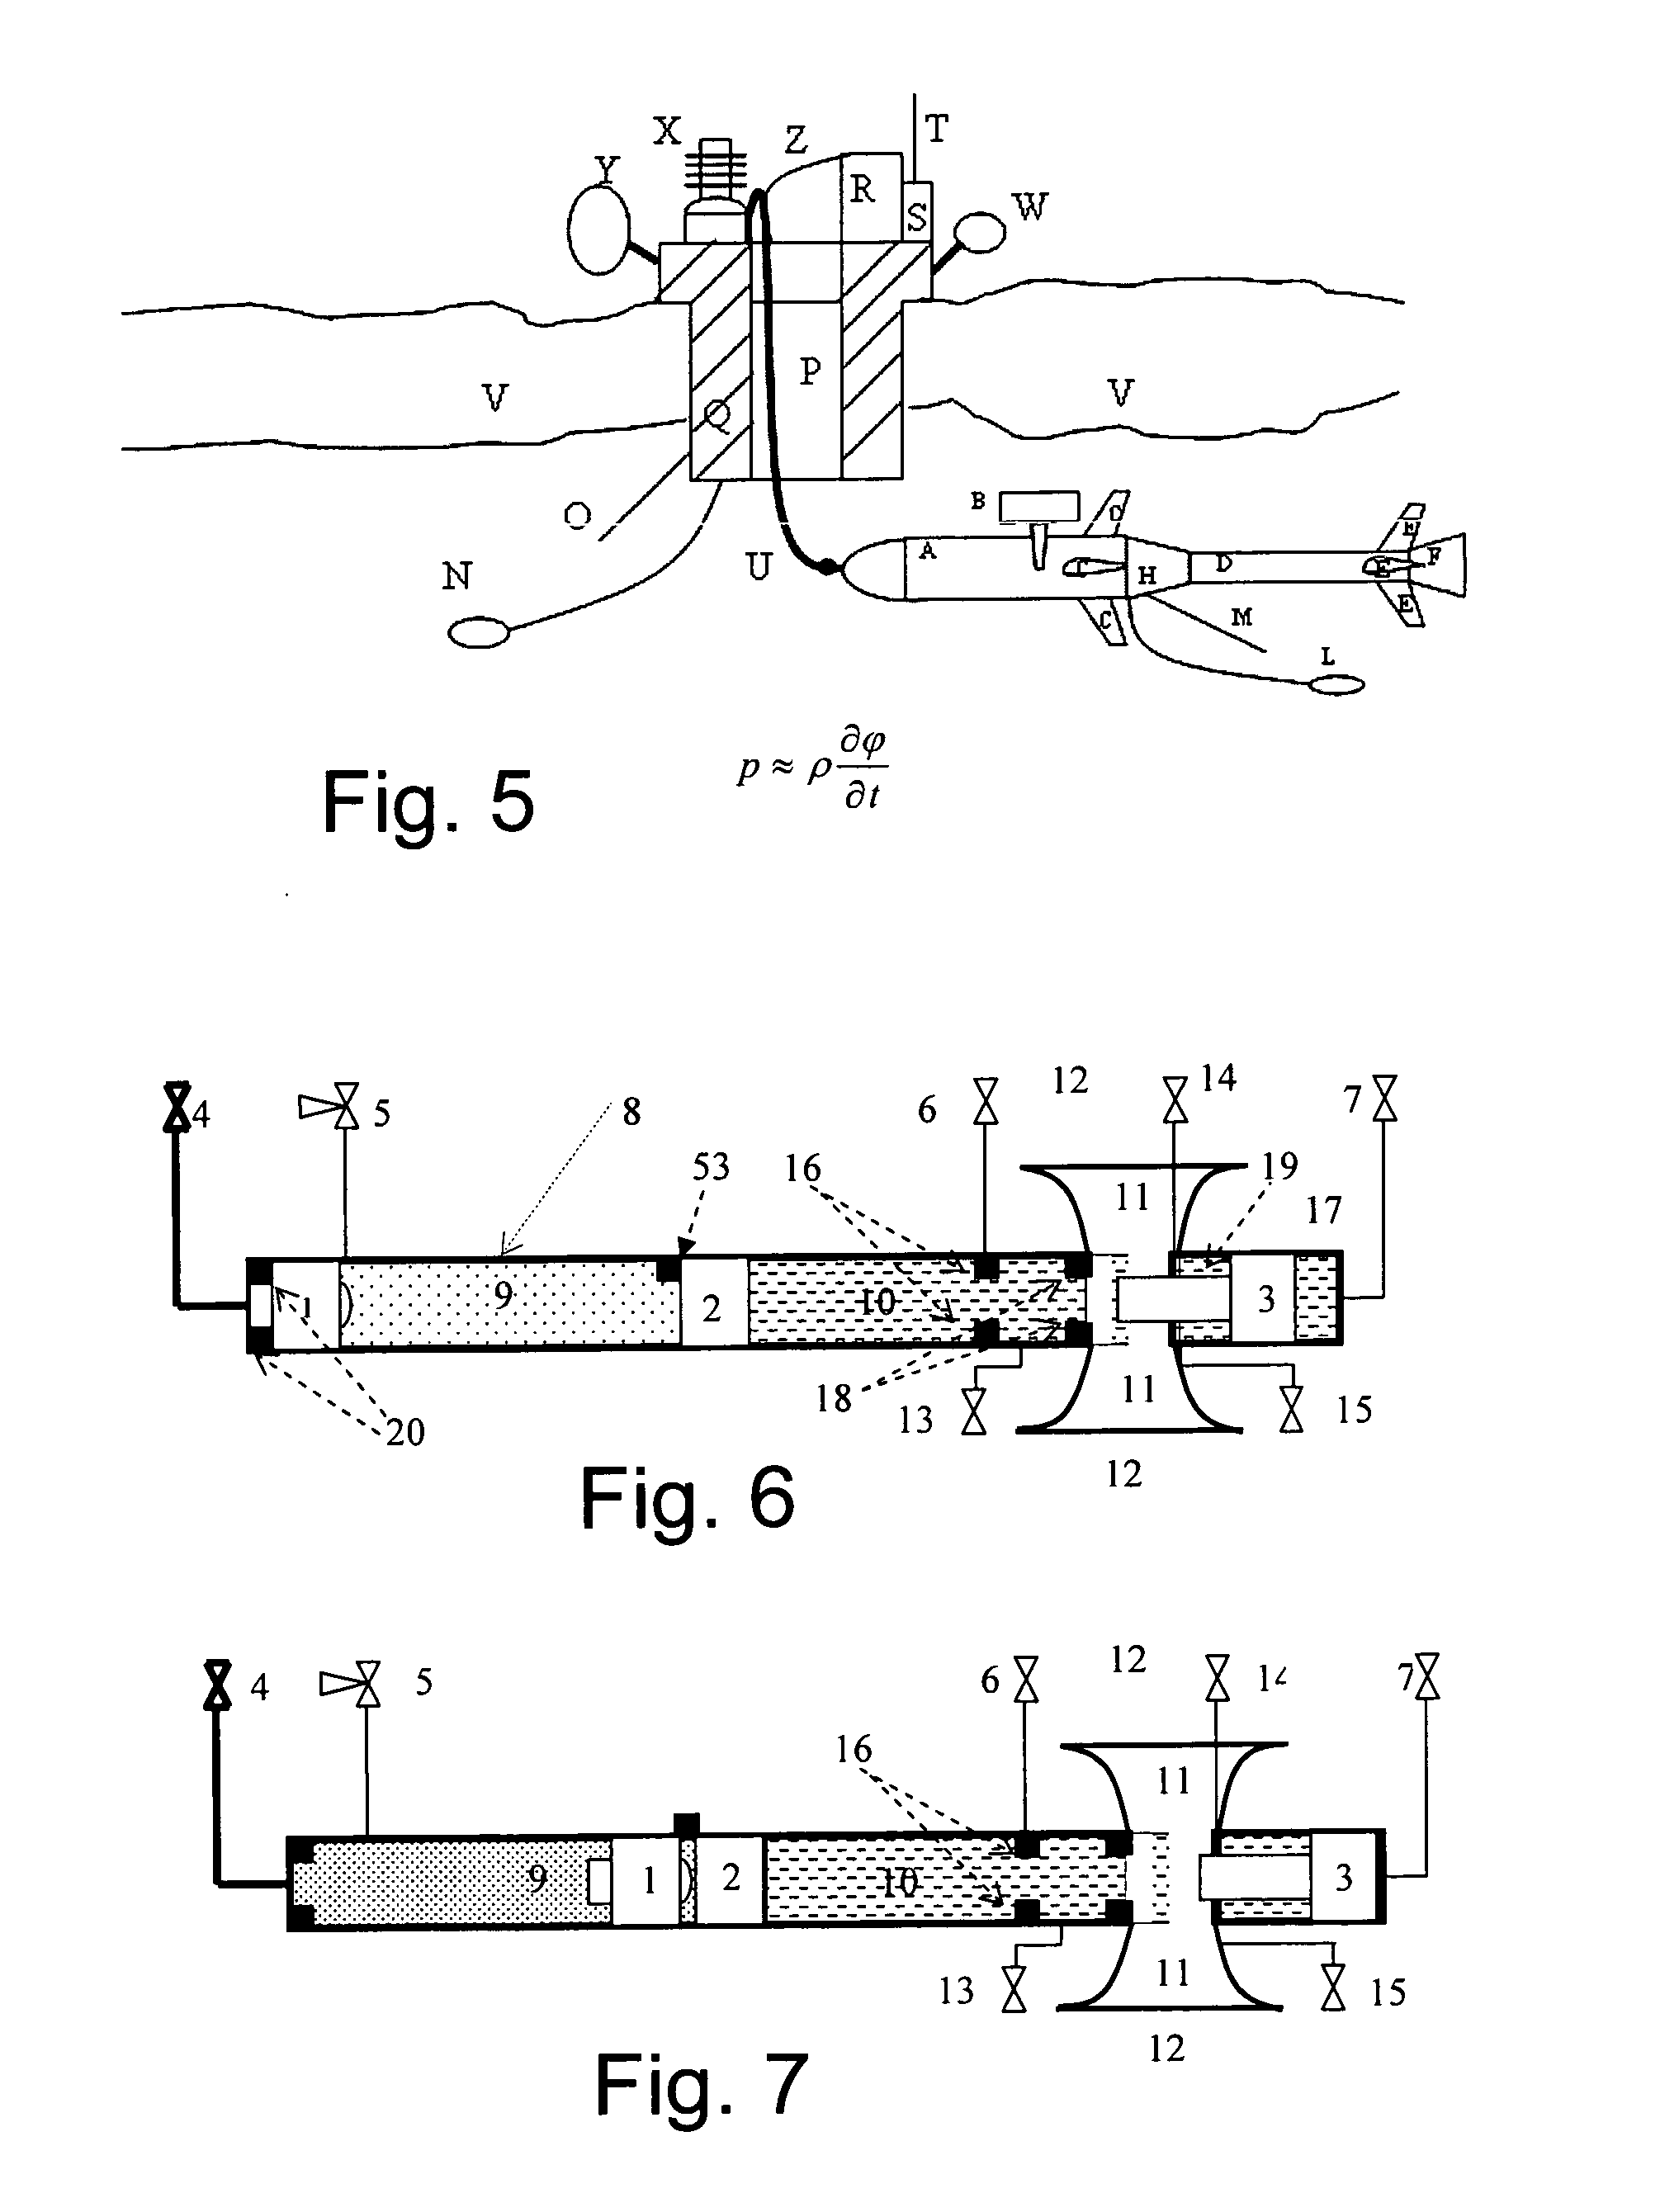 System for generating pressure waves in an underwater environment